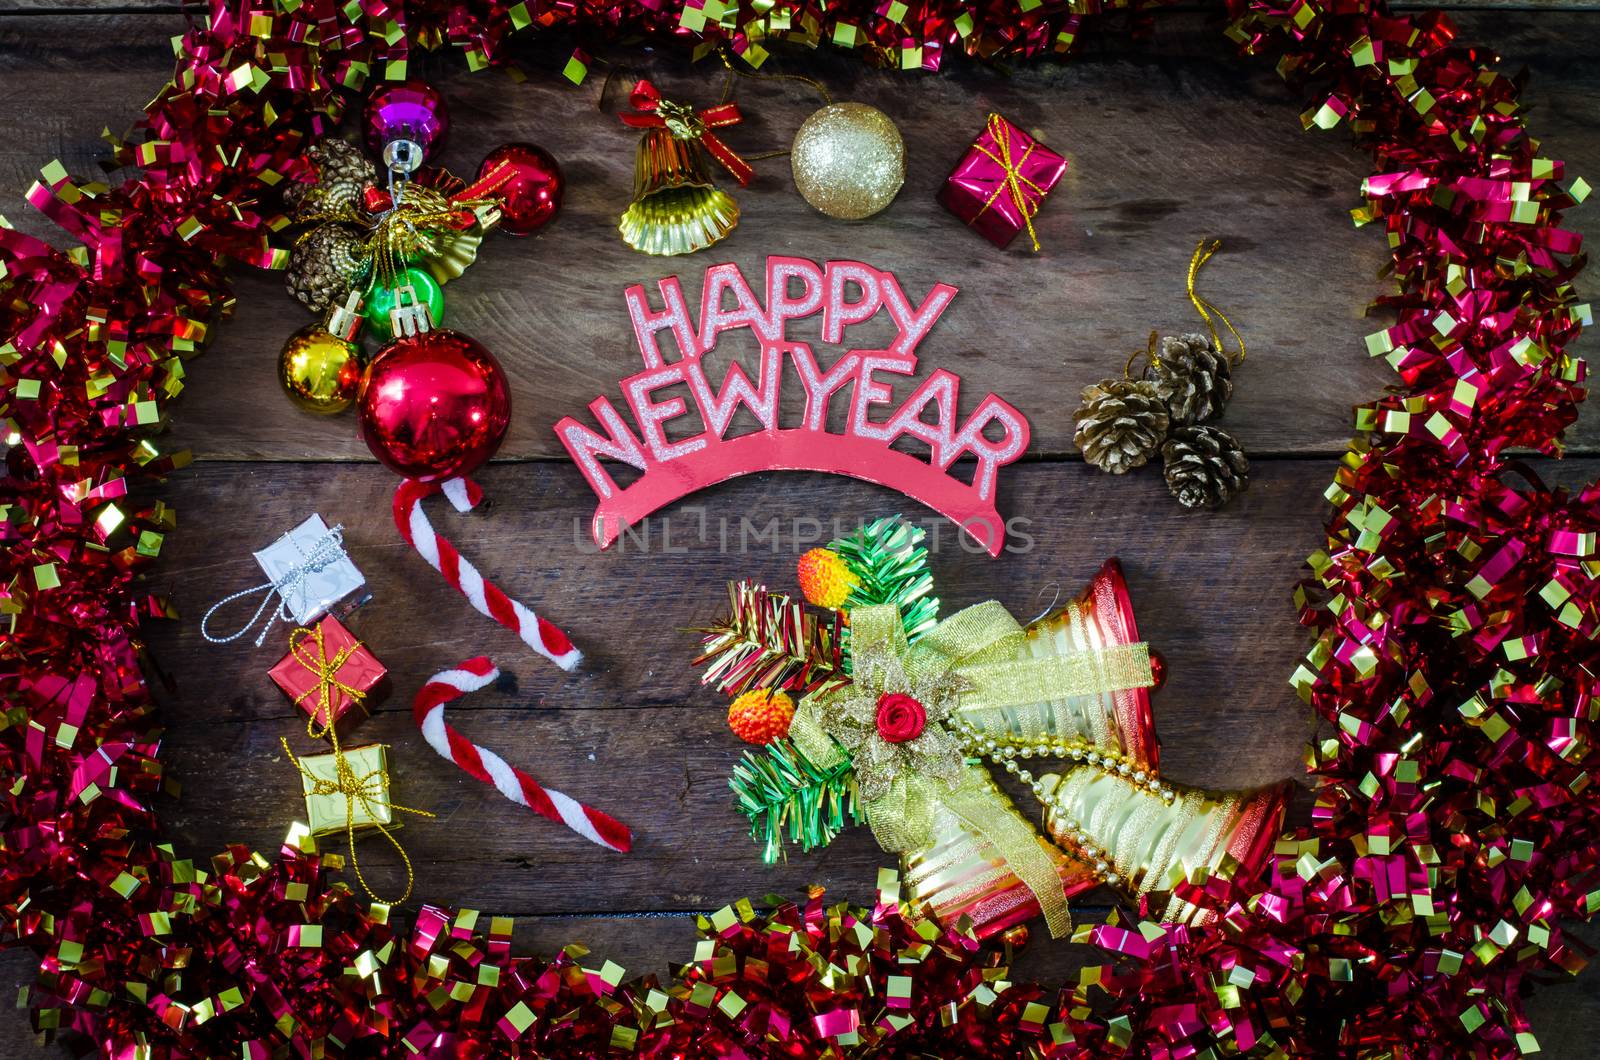  happy New Year message and gift box on wooden background. by photobyphotoboy